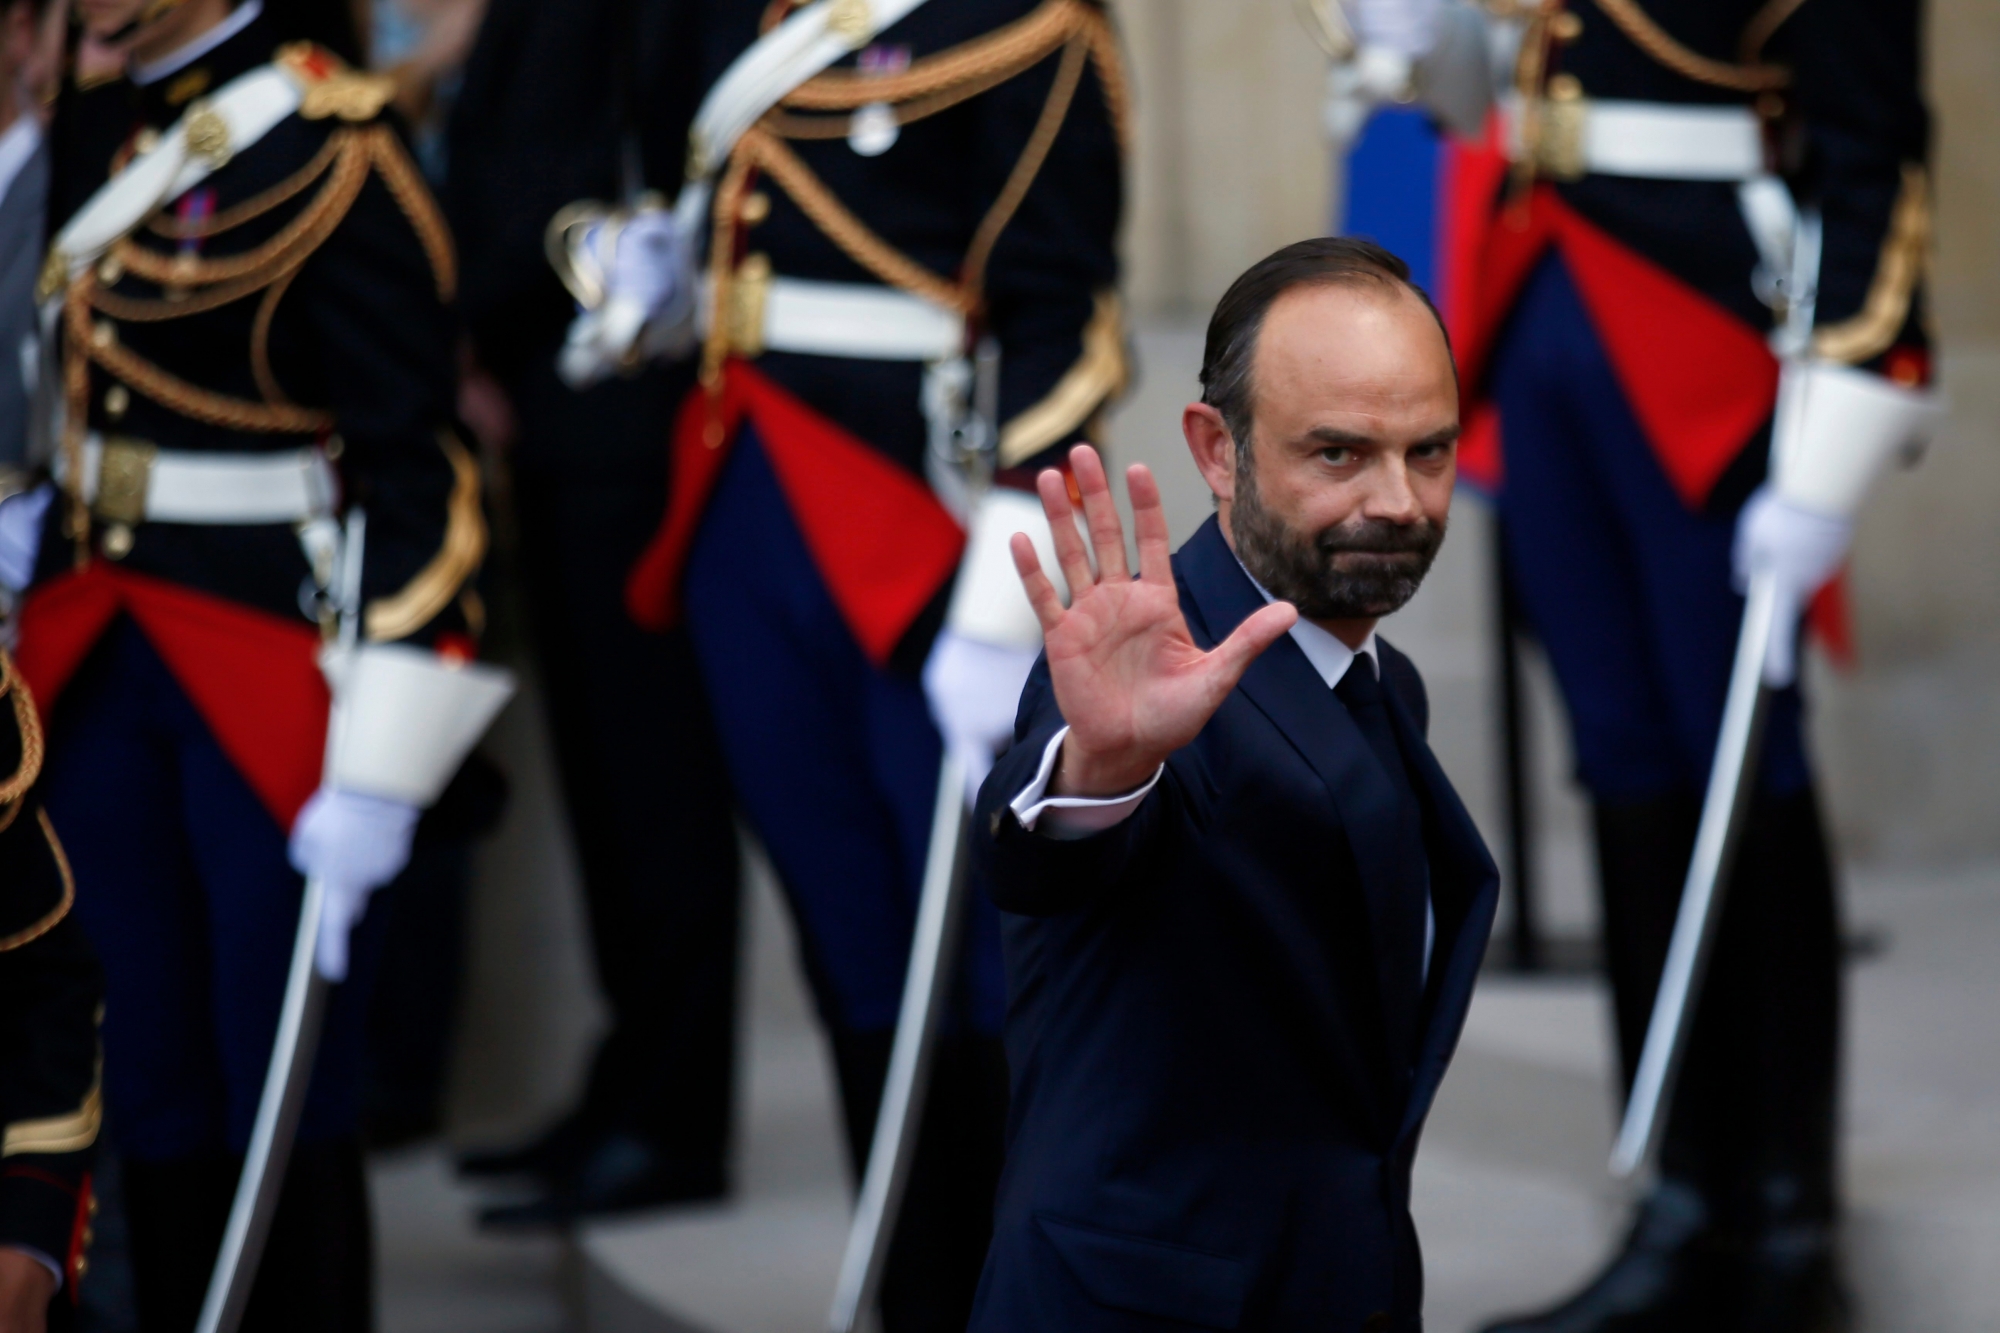 Newly appointed French Prime Minister Edouard Philippe waves after the handover ceremony with outgoing Prime Minister Bernard Cazeneuve in Paris, Monday, May, 15, 2017. French President Emmanuel Macron has appointed Philippe, a relatively unknown 46-year-old lawmaker, as prime minister, making good on campaign promises to repopulate French politics with new faces. (AP Photo/Francois Mori) France President